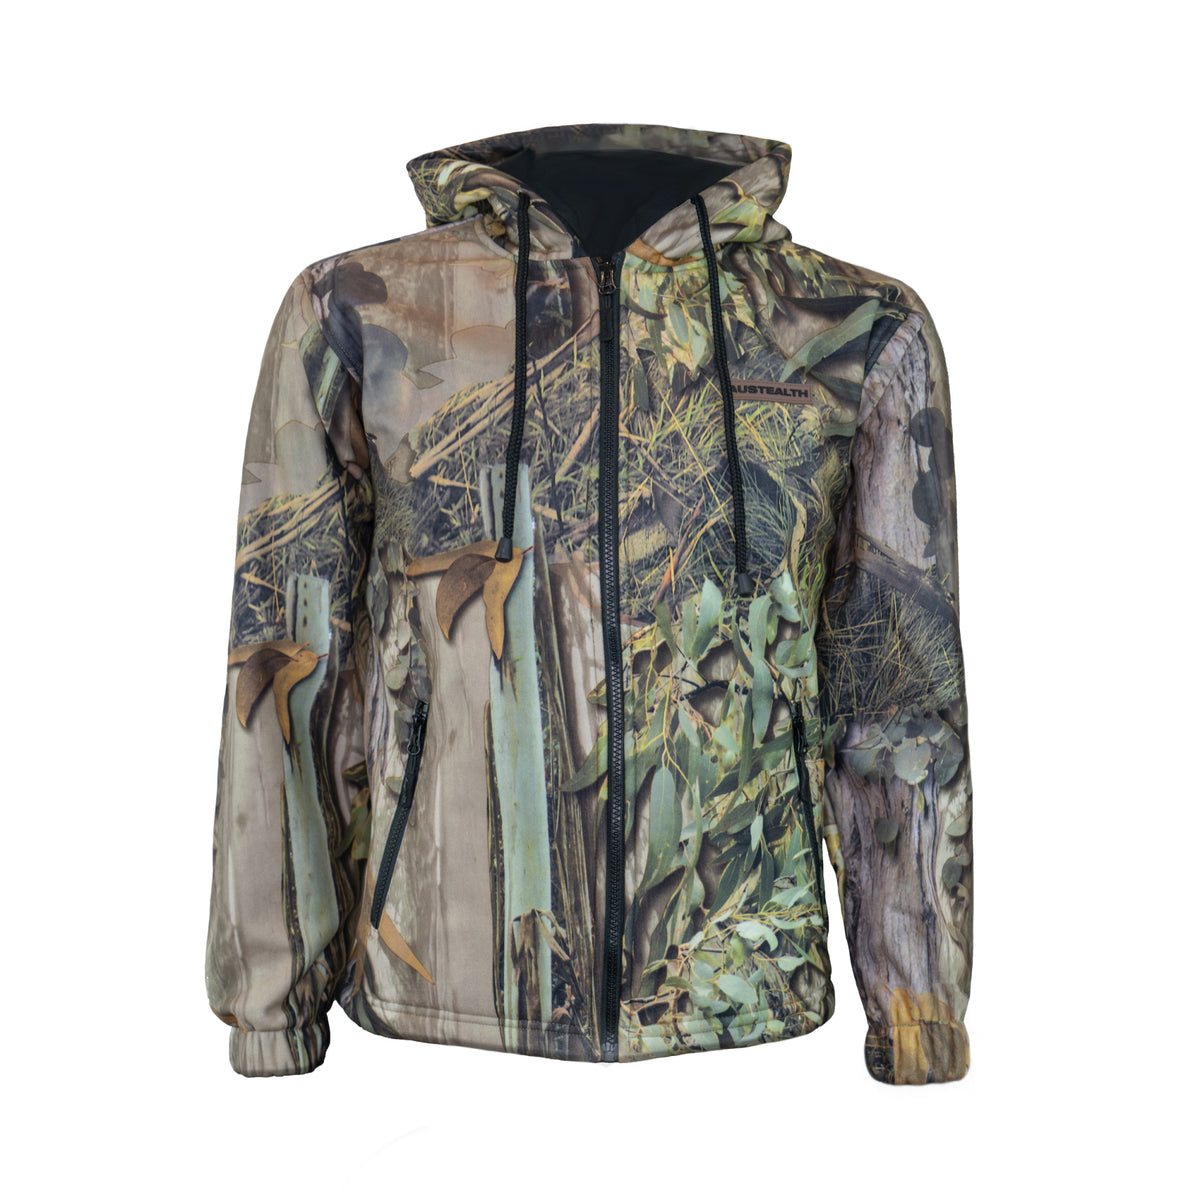 Austealth Hooded Jacket in Native Camo